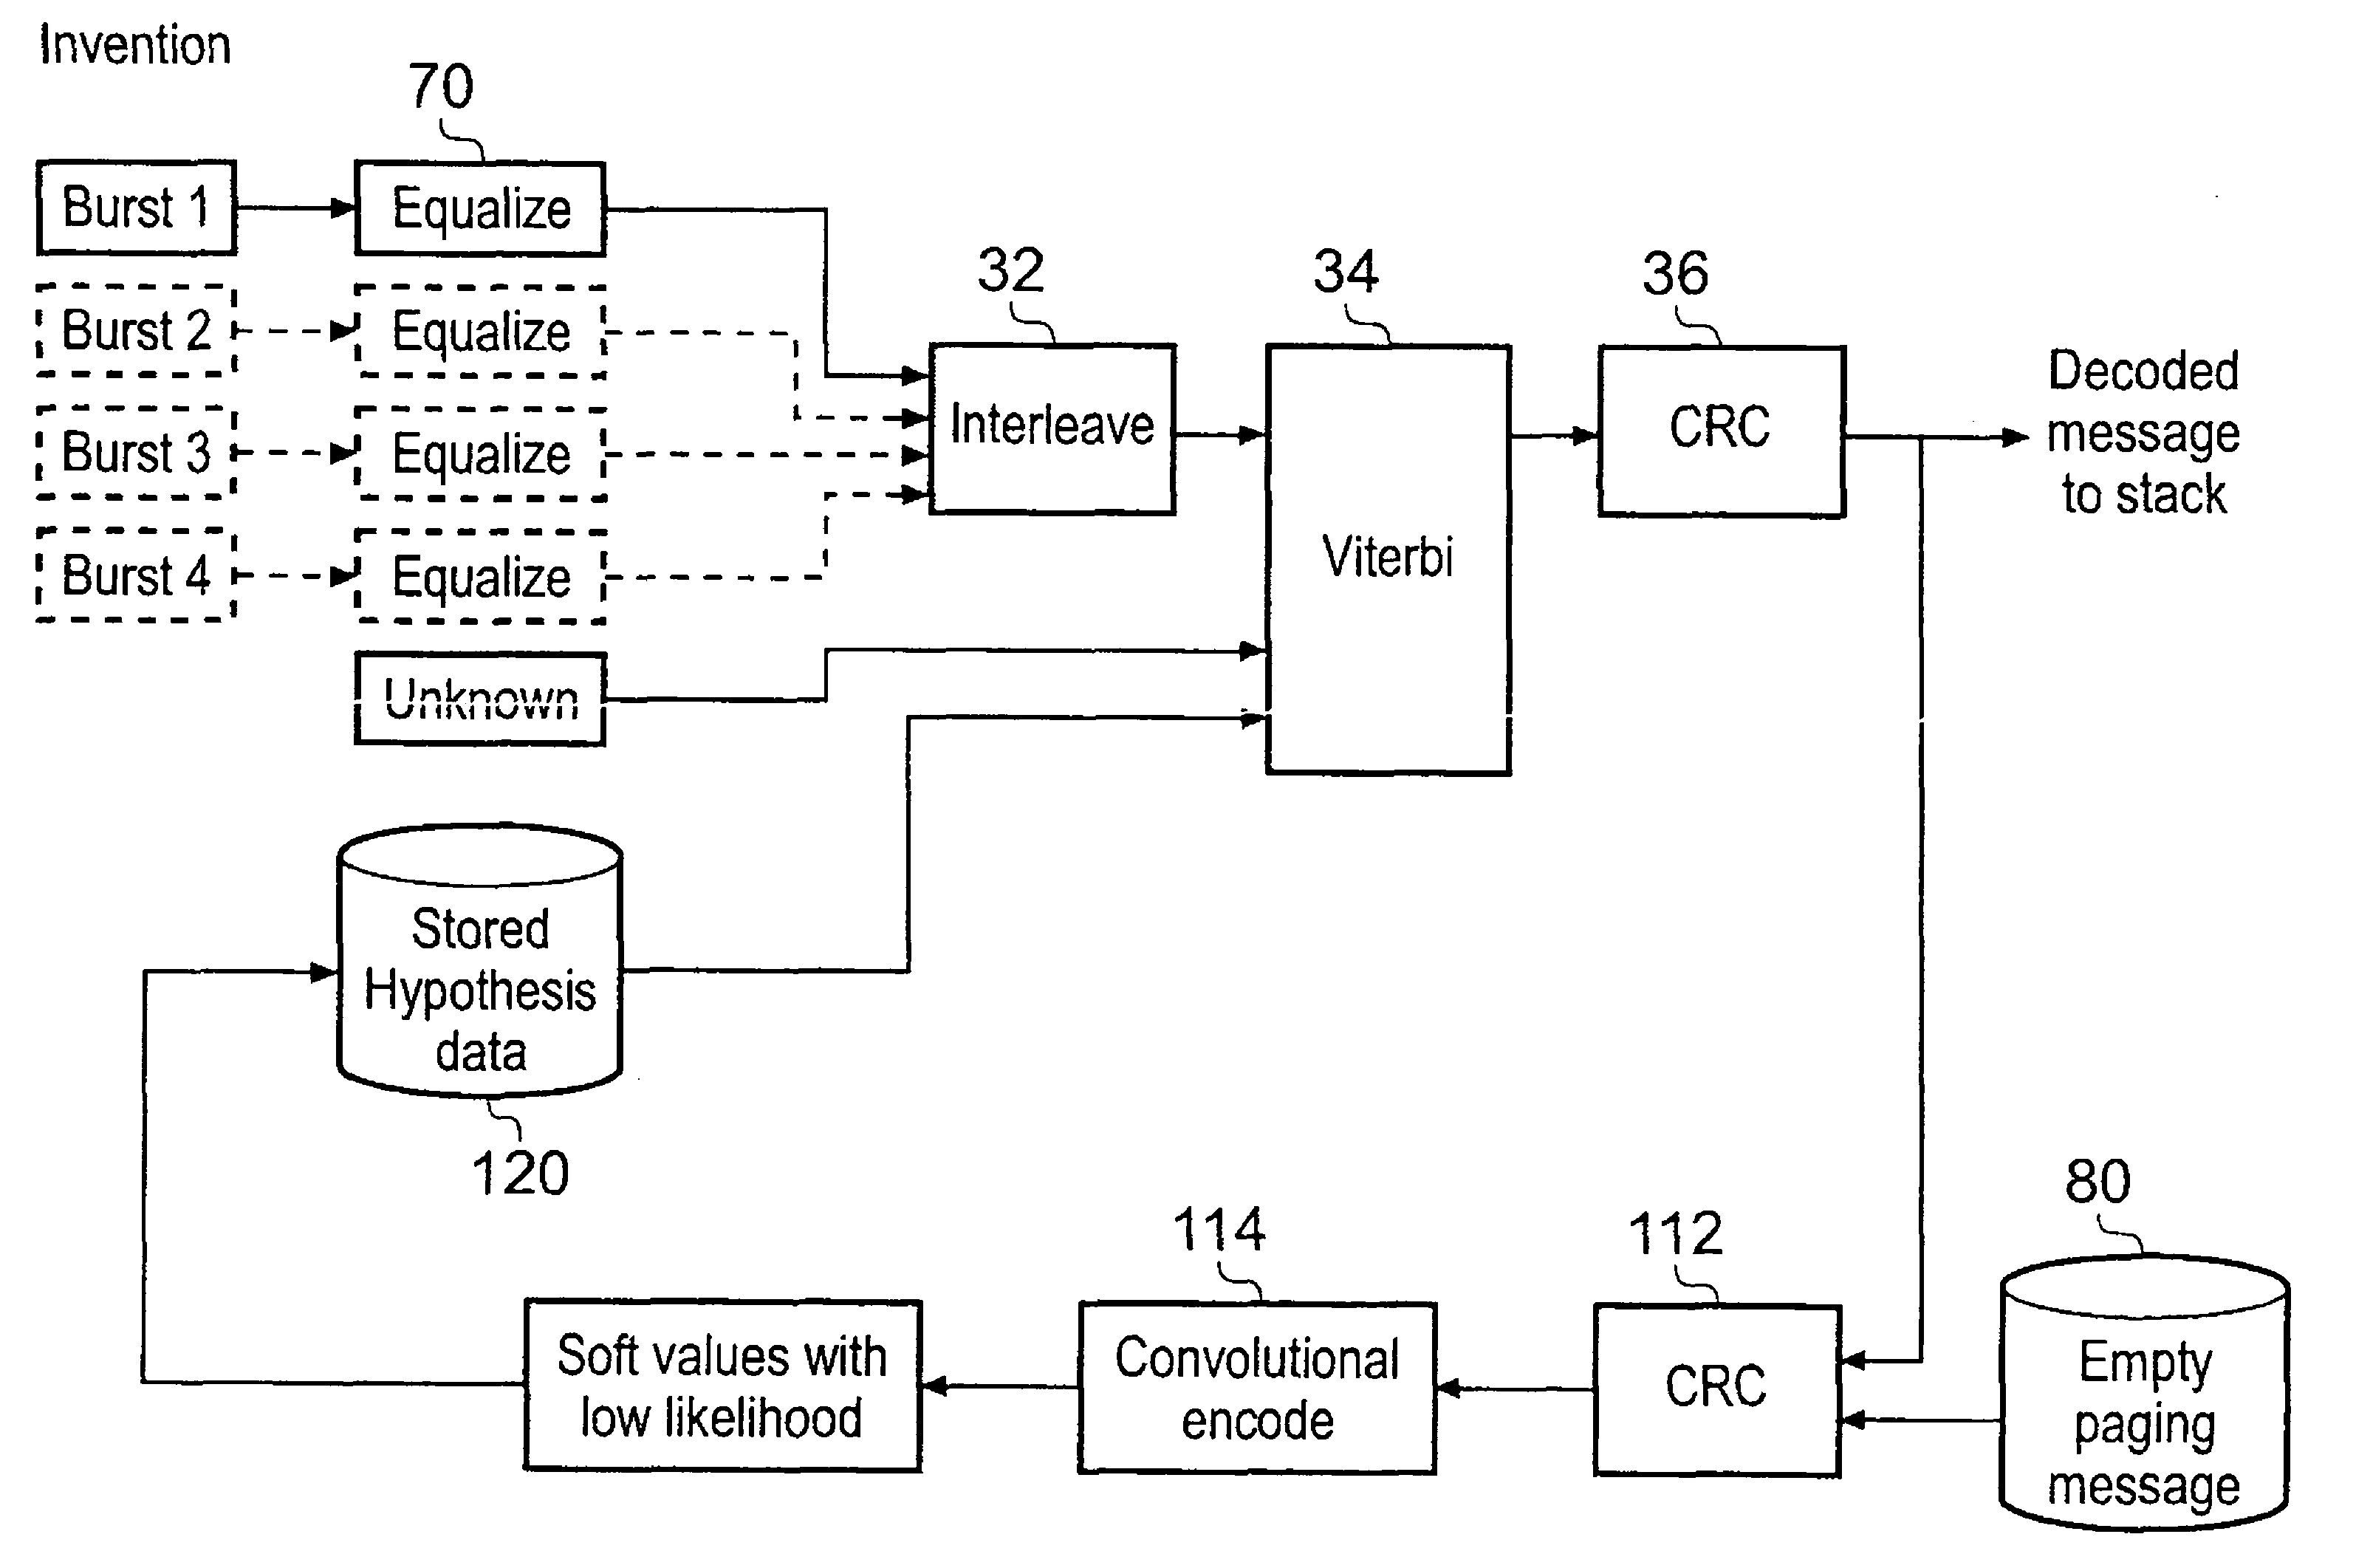 Method of and apparatus for reducing power consumption in a mobile telephony system